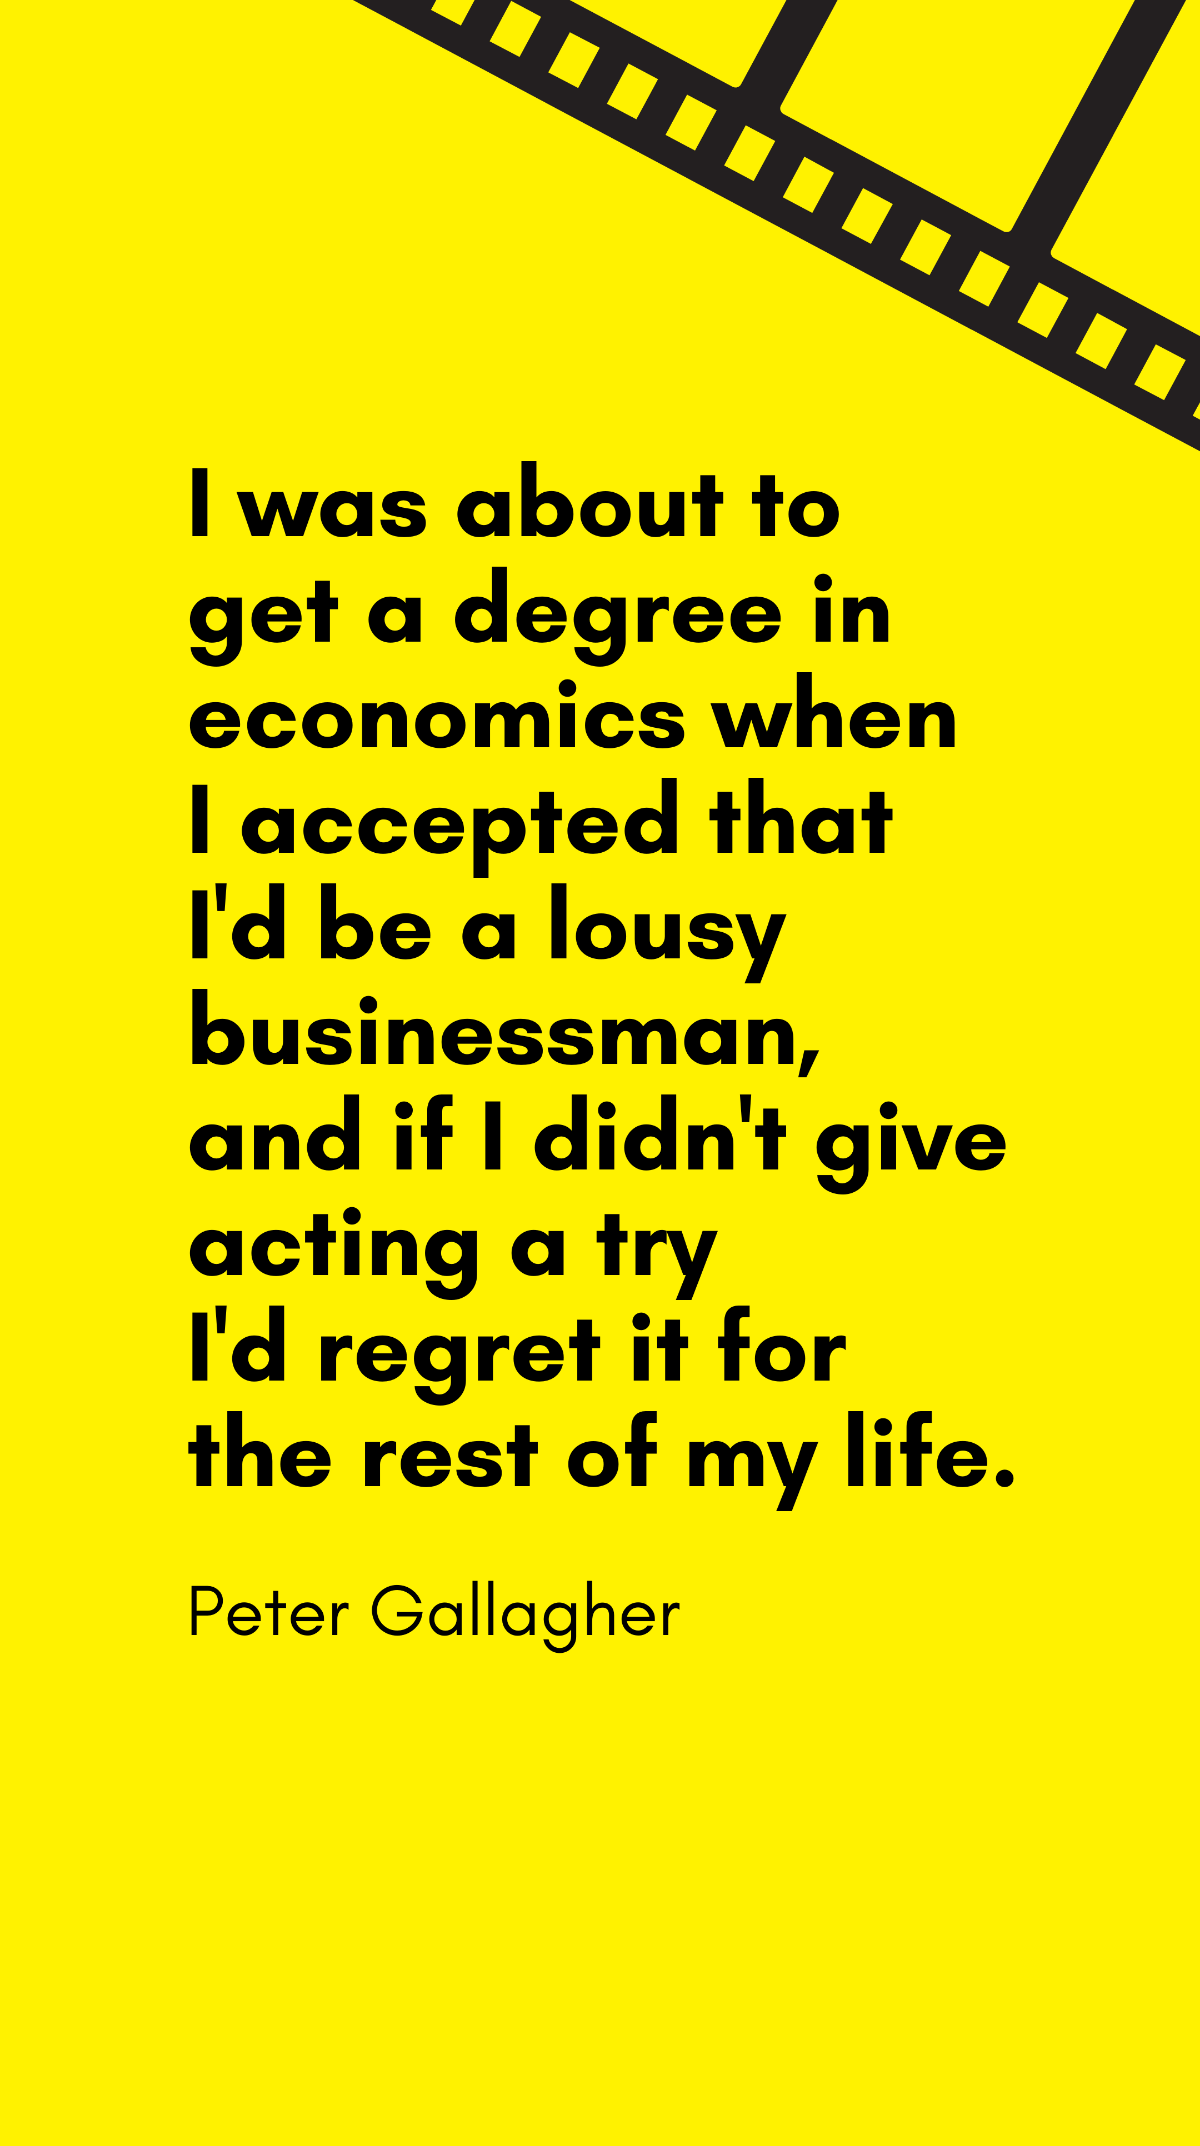 Free Peter Gallagher - I was about to get a degree in economics when I accepted that I'd be a lousy businessman, and if I didn't give acting a try I'd regret it for the rest of my life. Template